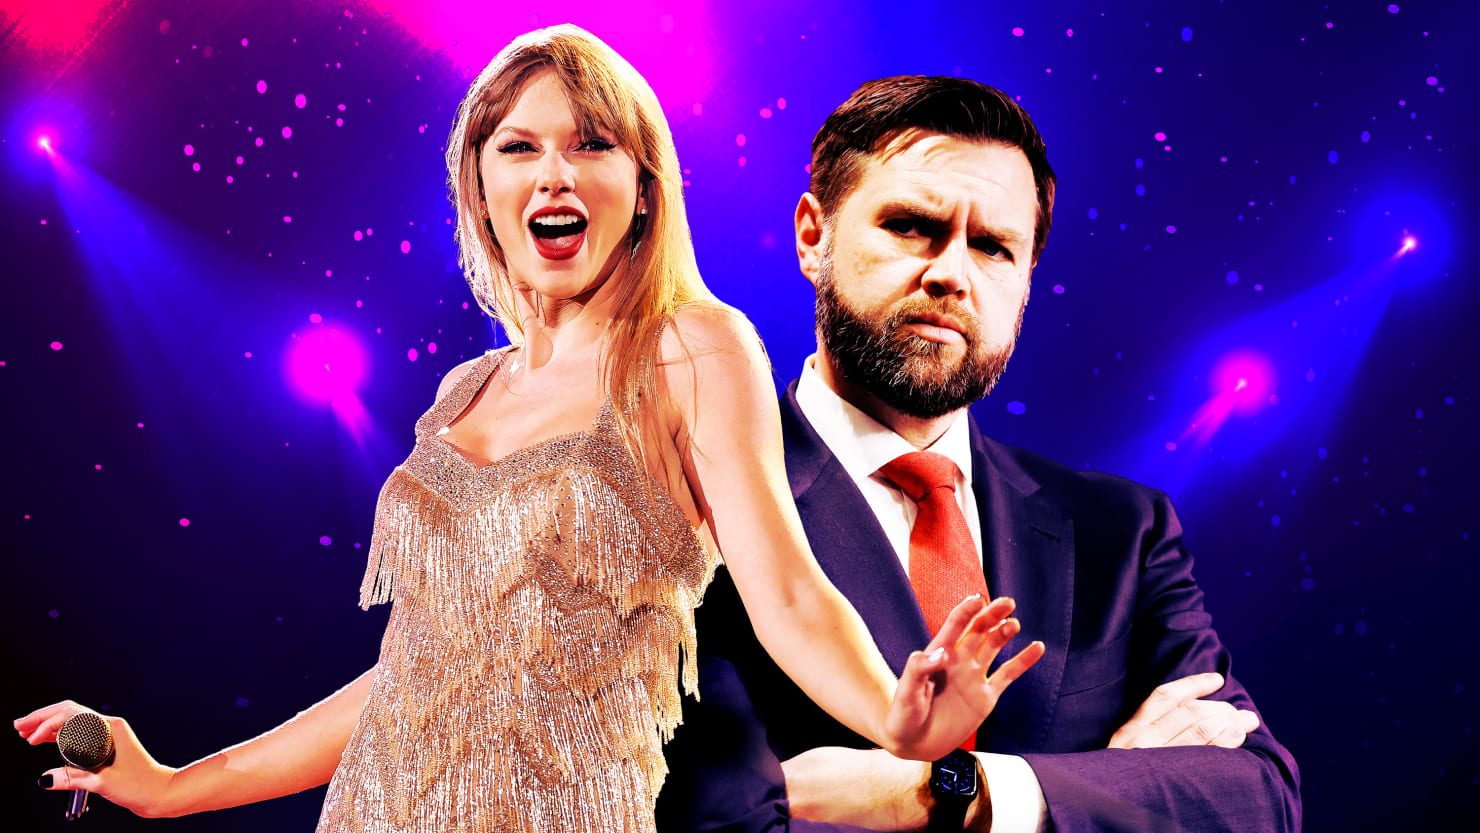 Yale Law School snubs JD Vance – but mentions Taylor Swift